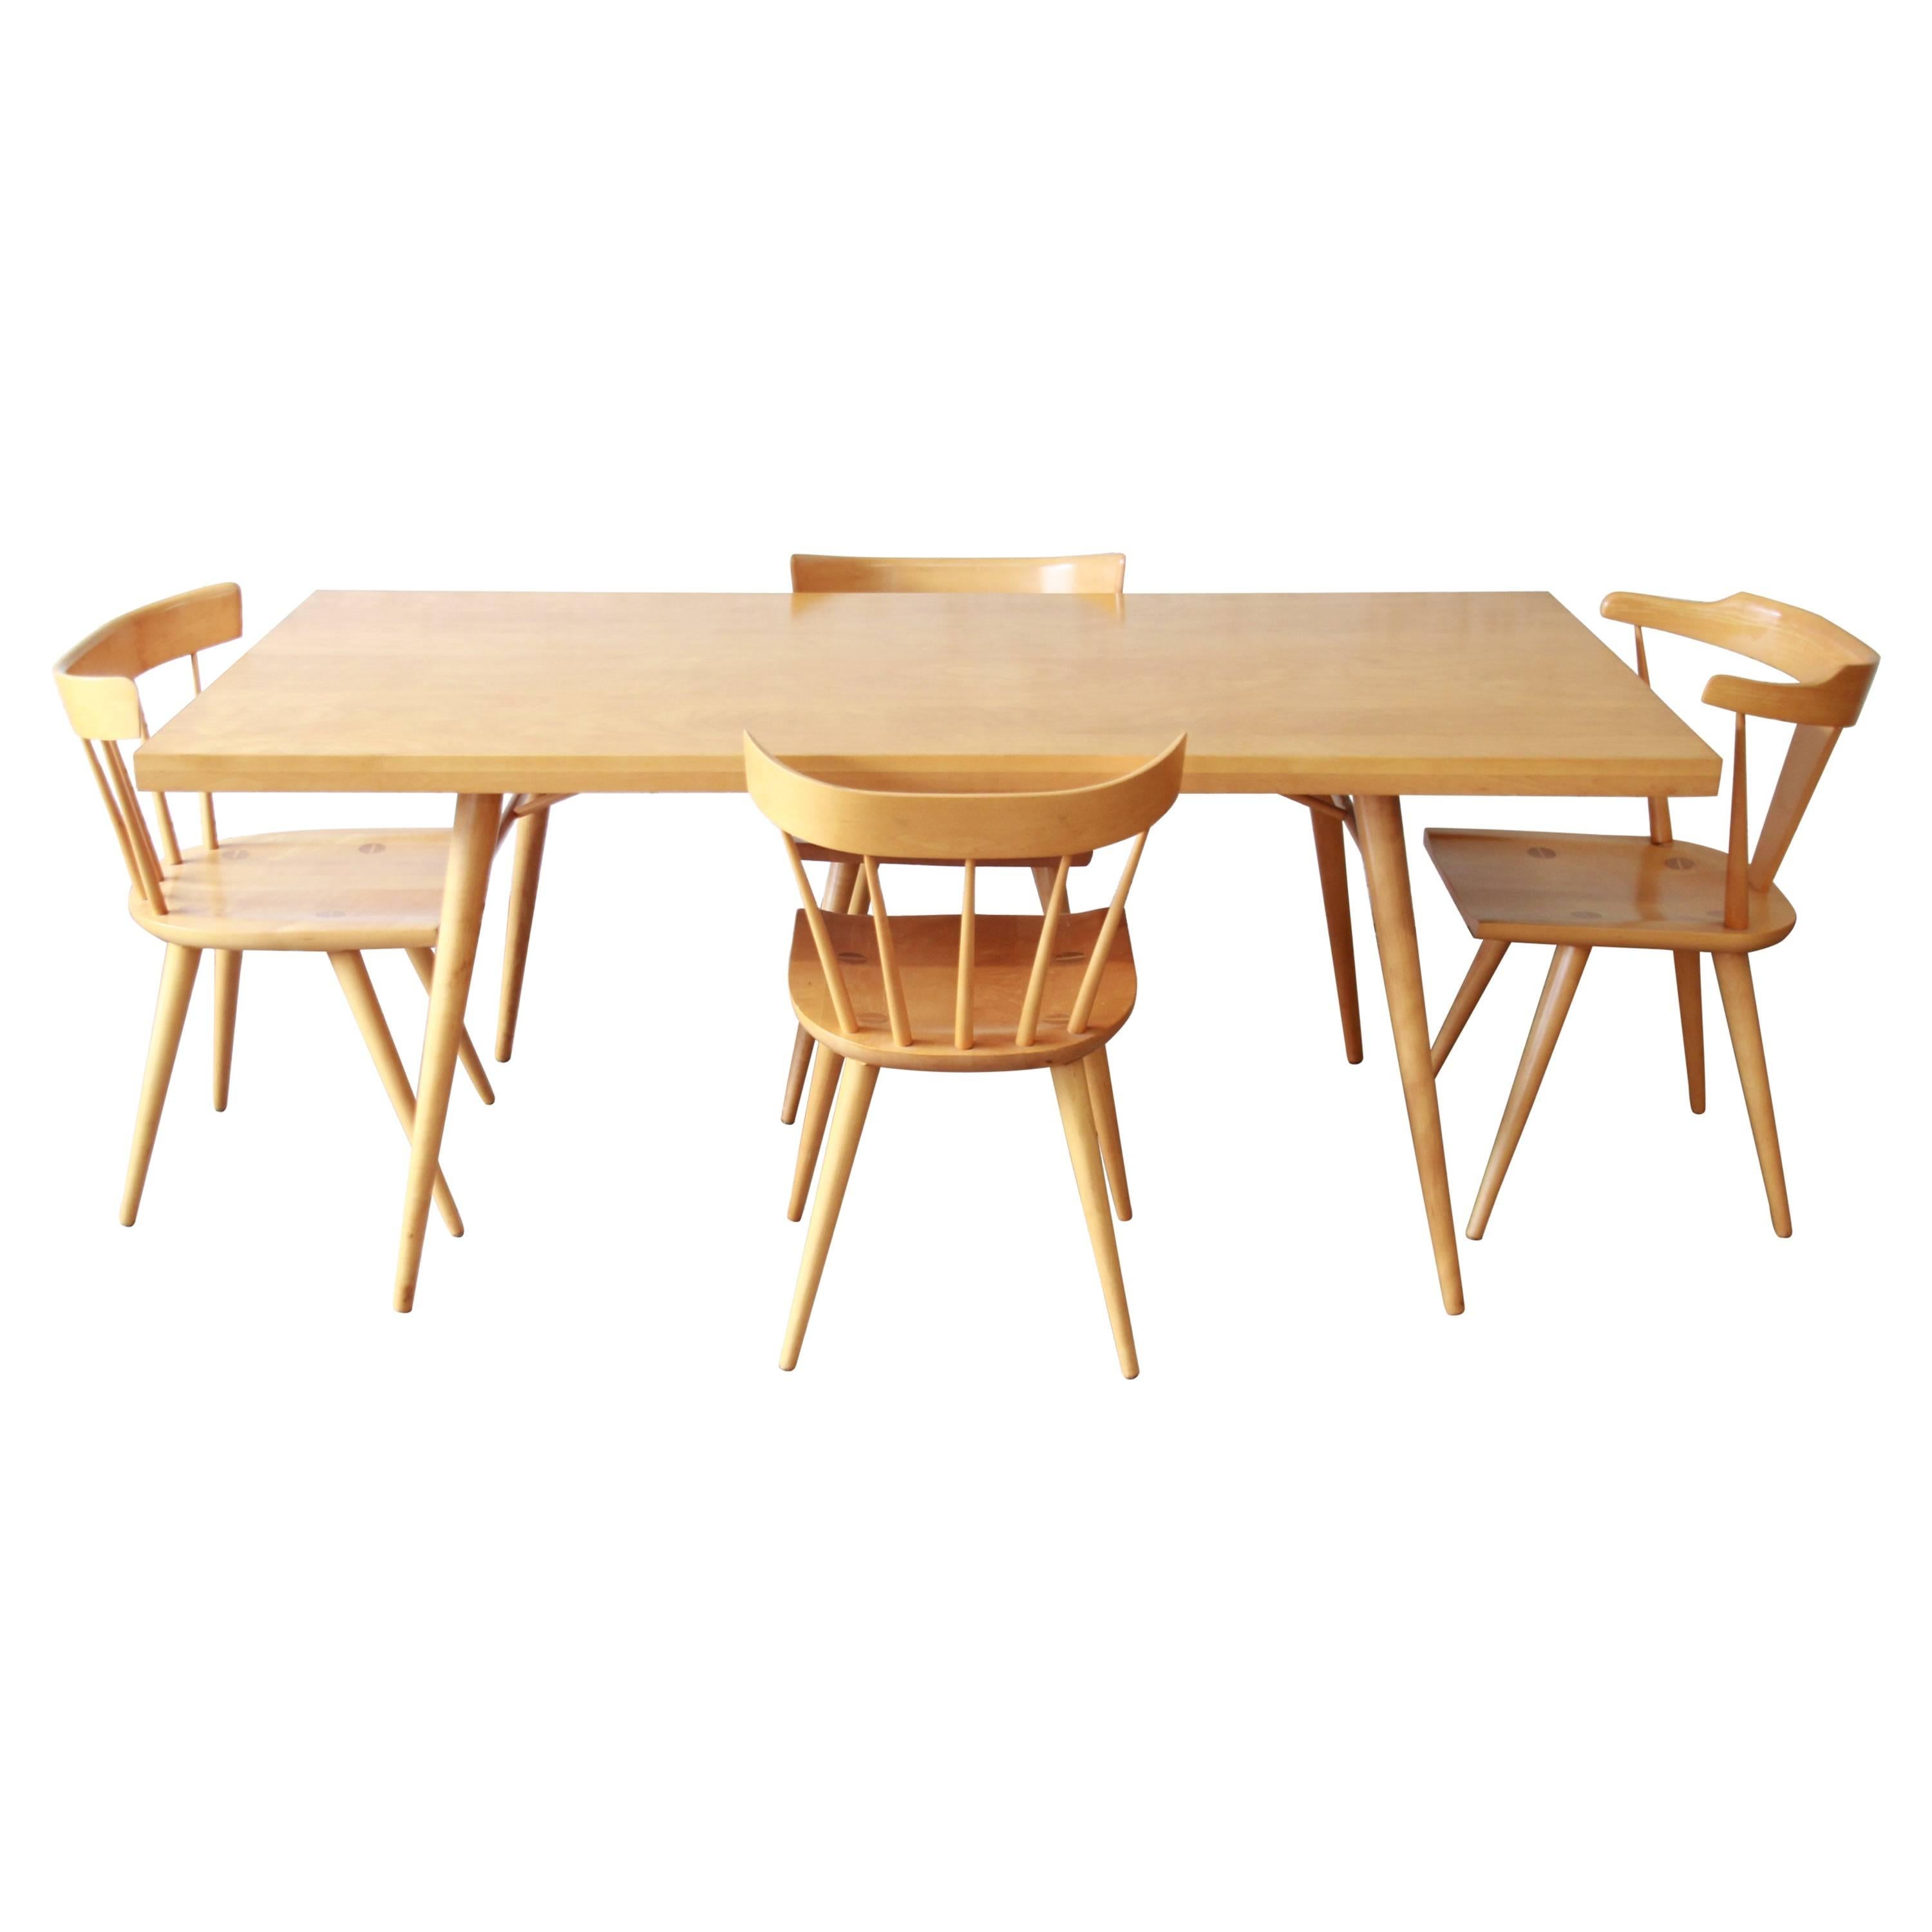 Paul McCobb Planner Group Dining Set for Winchendon Furniture